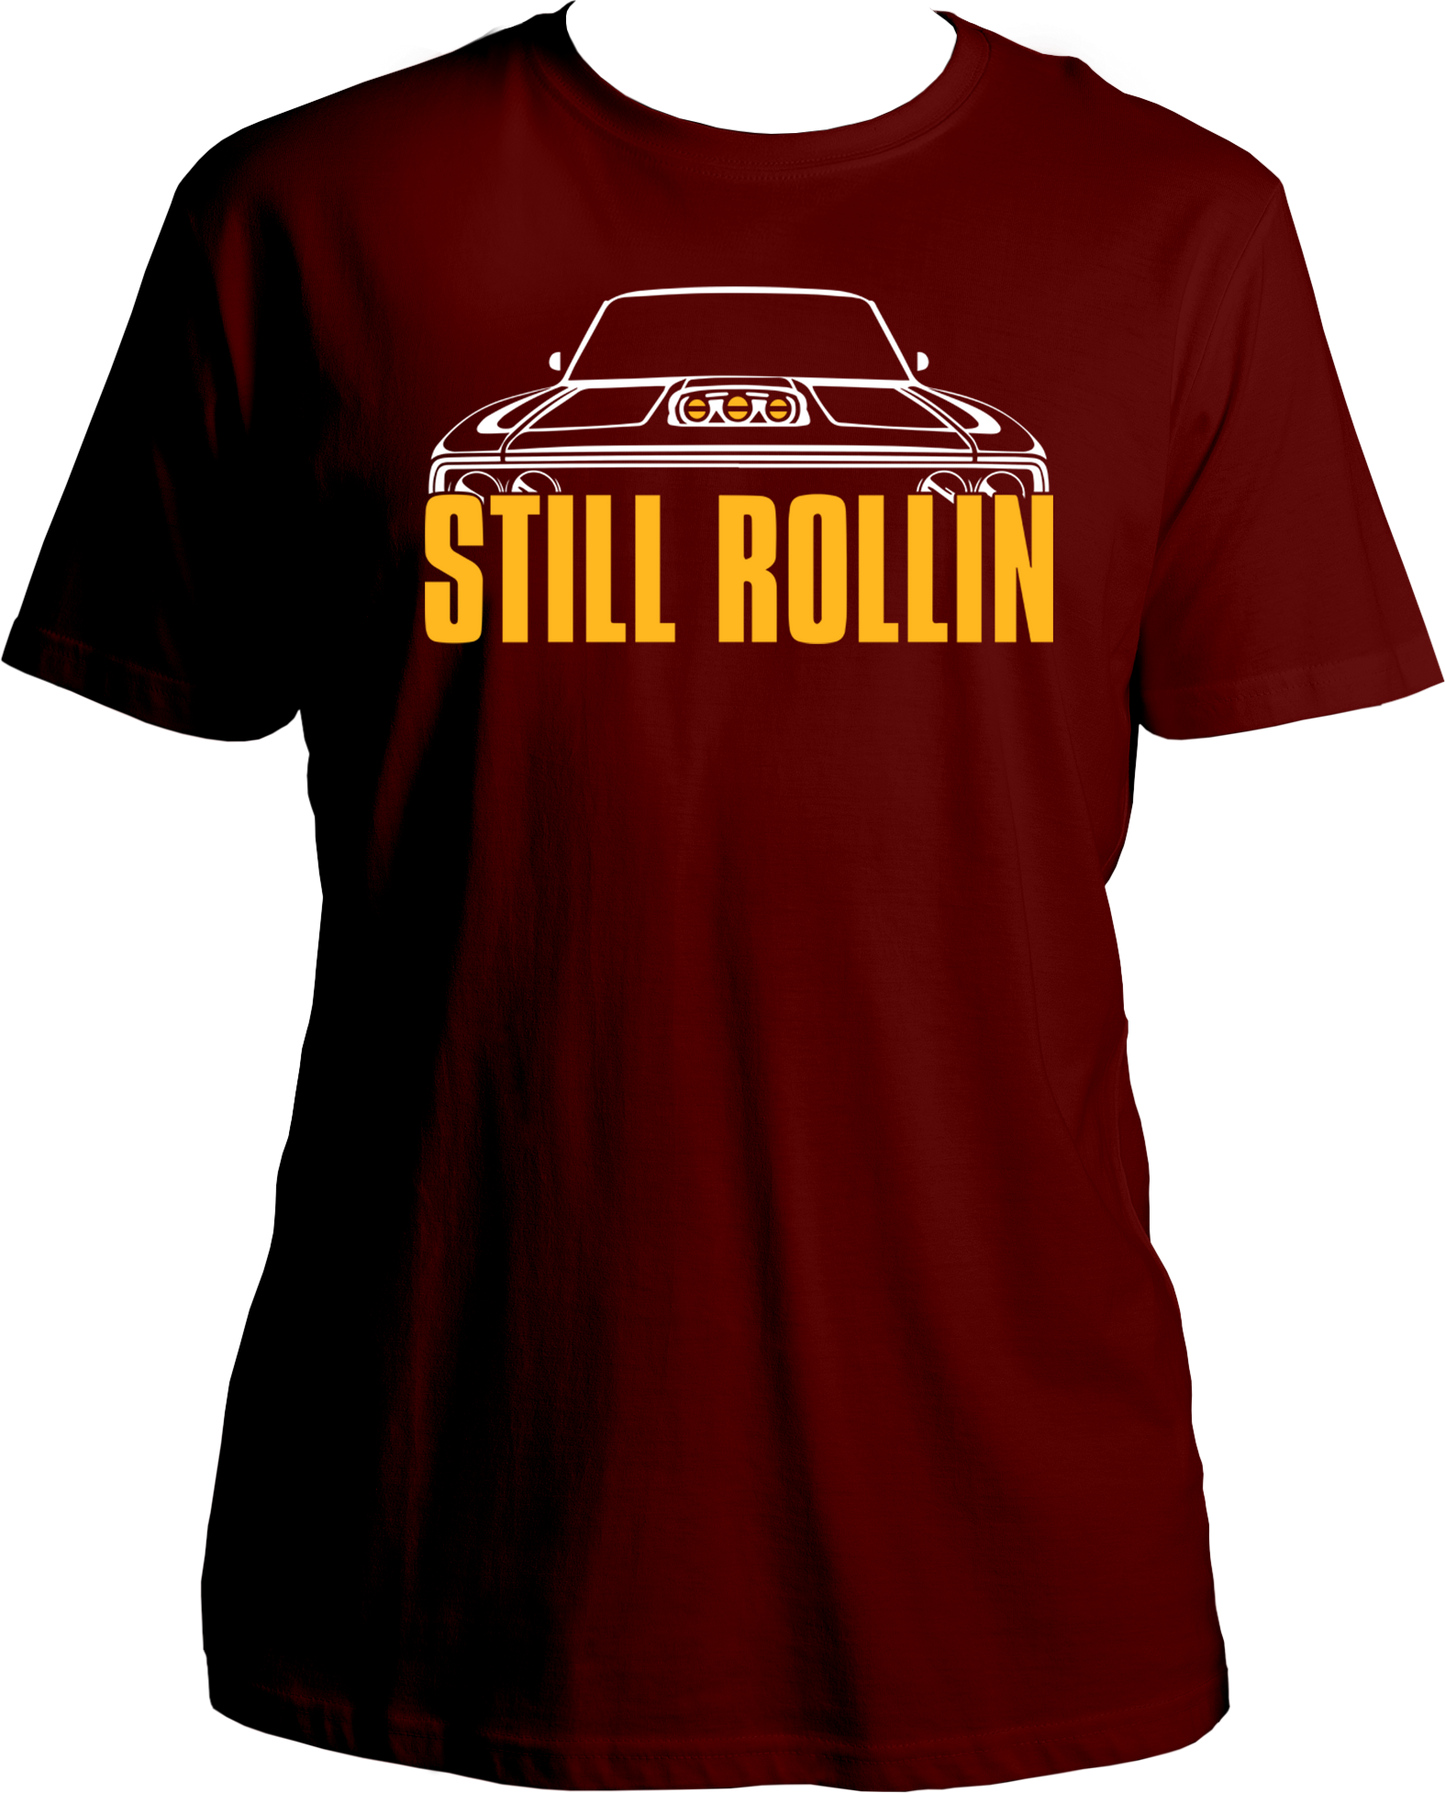 Introducing our exclusive Unisex "Still Rollin" T-shirt – a stylish homage to Shubh's electrifying Punjabi anthem! Crafted with comfort and style in mind, this round neck cotton tee is a must-have for music enthusiasts and trendsetters alike.<br data-mce-fragment="1">